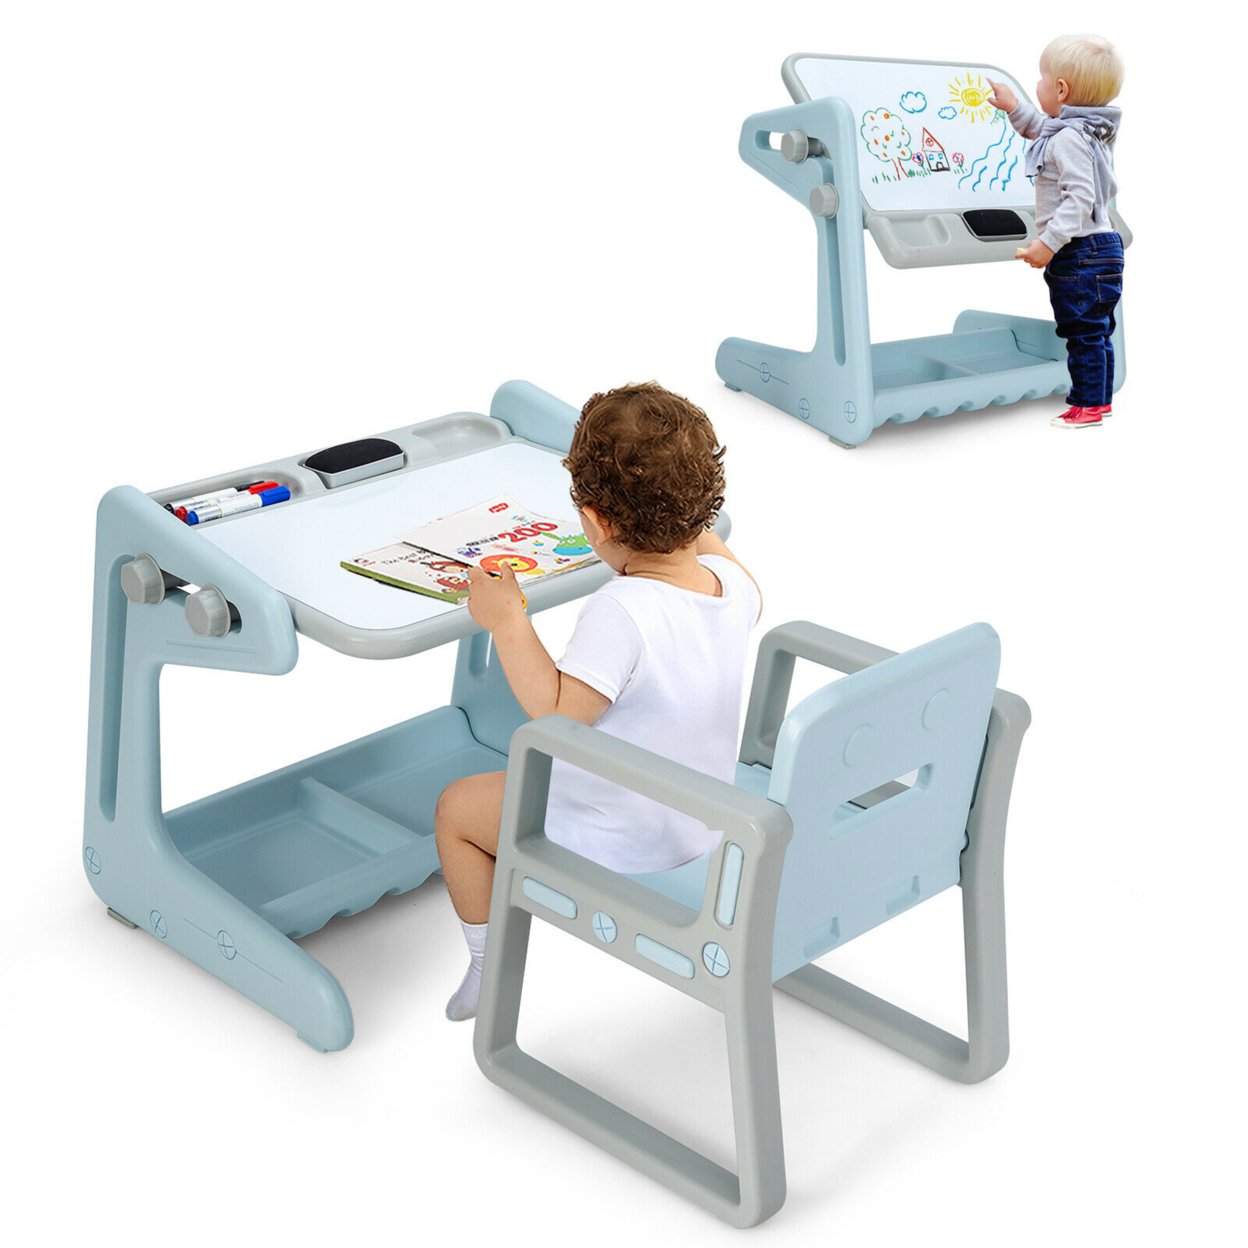 Gymax 2 in 1 Kids Easel Table and Chair Set Adjustable Art Painting Board Gray/Blue/Light Pink